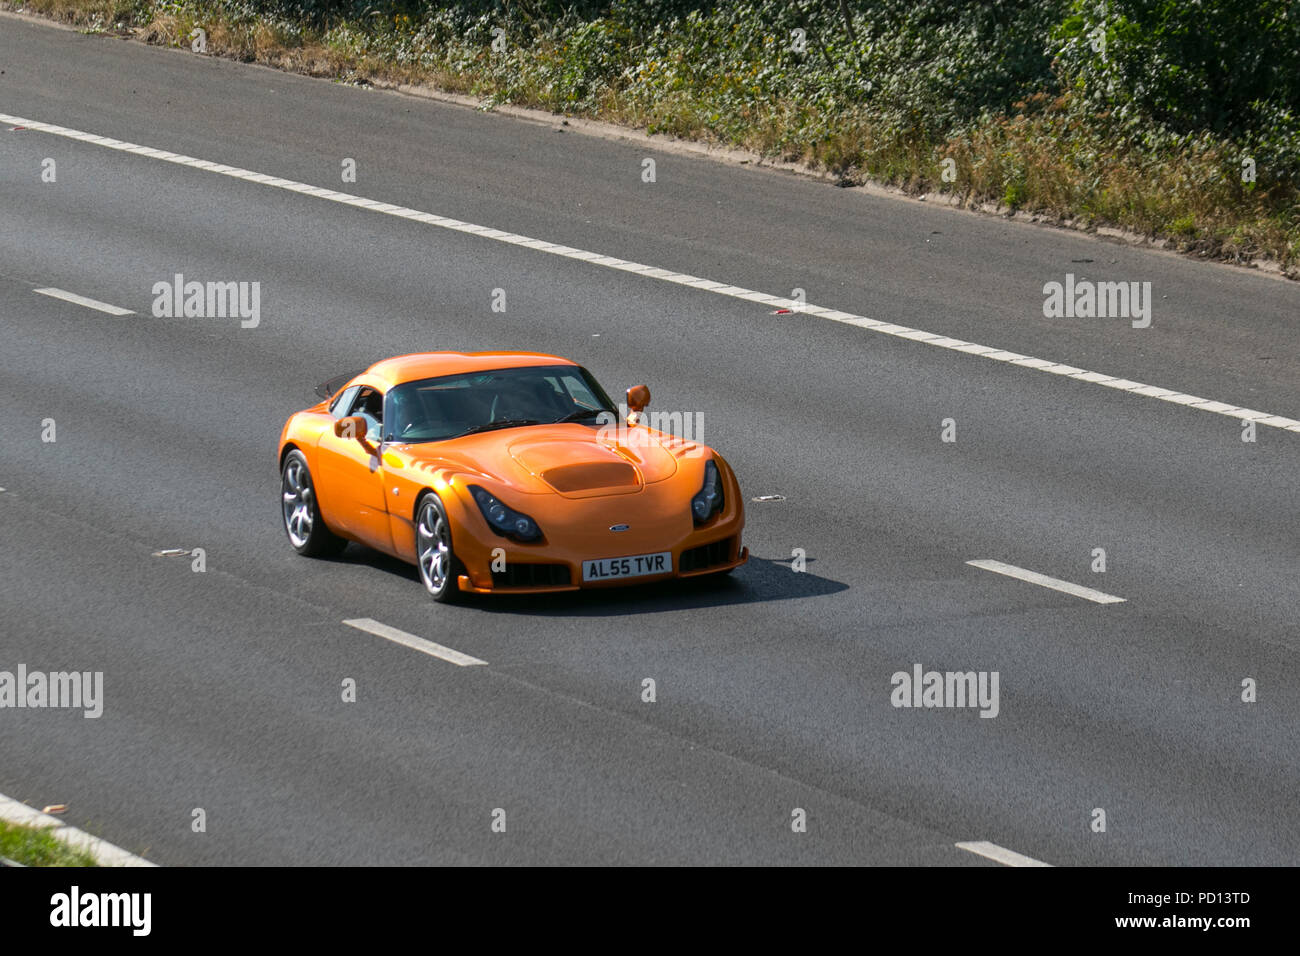 2005 55 plate Orange British Tvr Sagaris 3996cc petrol coupe is a sports car designed and built by the British manufacturer TVR in Blackpool, Lancashire. UK Stock Photo